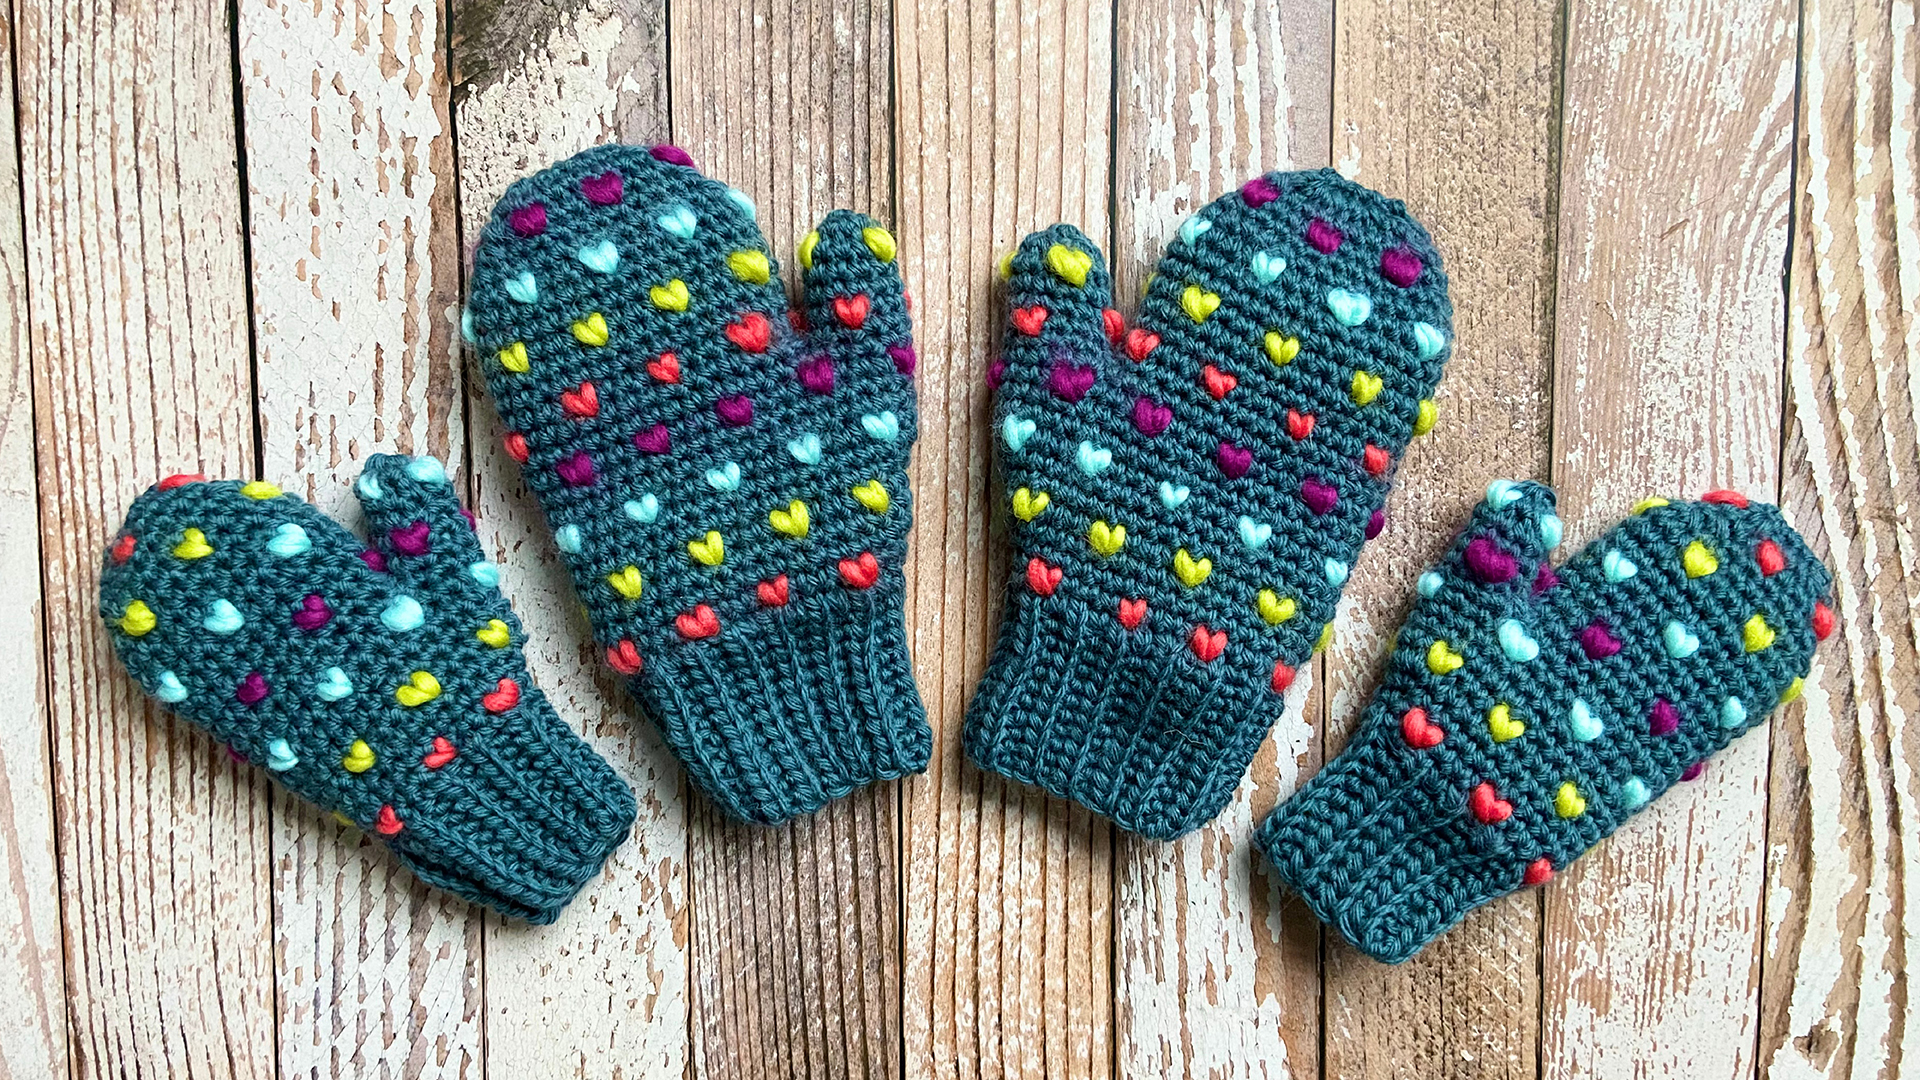 Red Heart Crochet Mittens For All Pattern